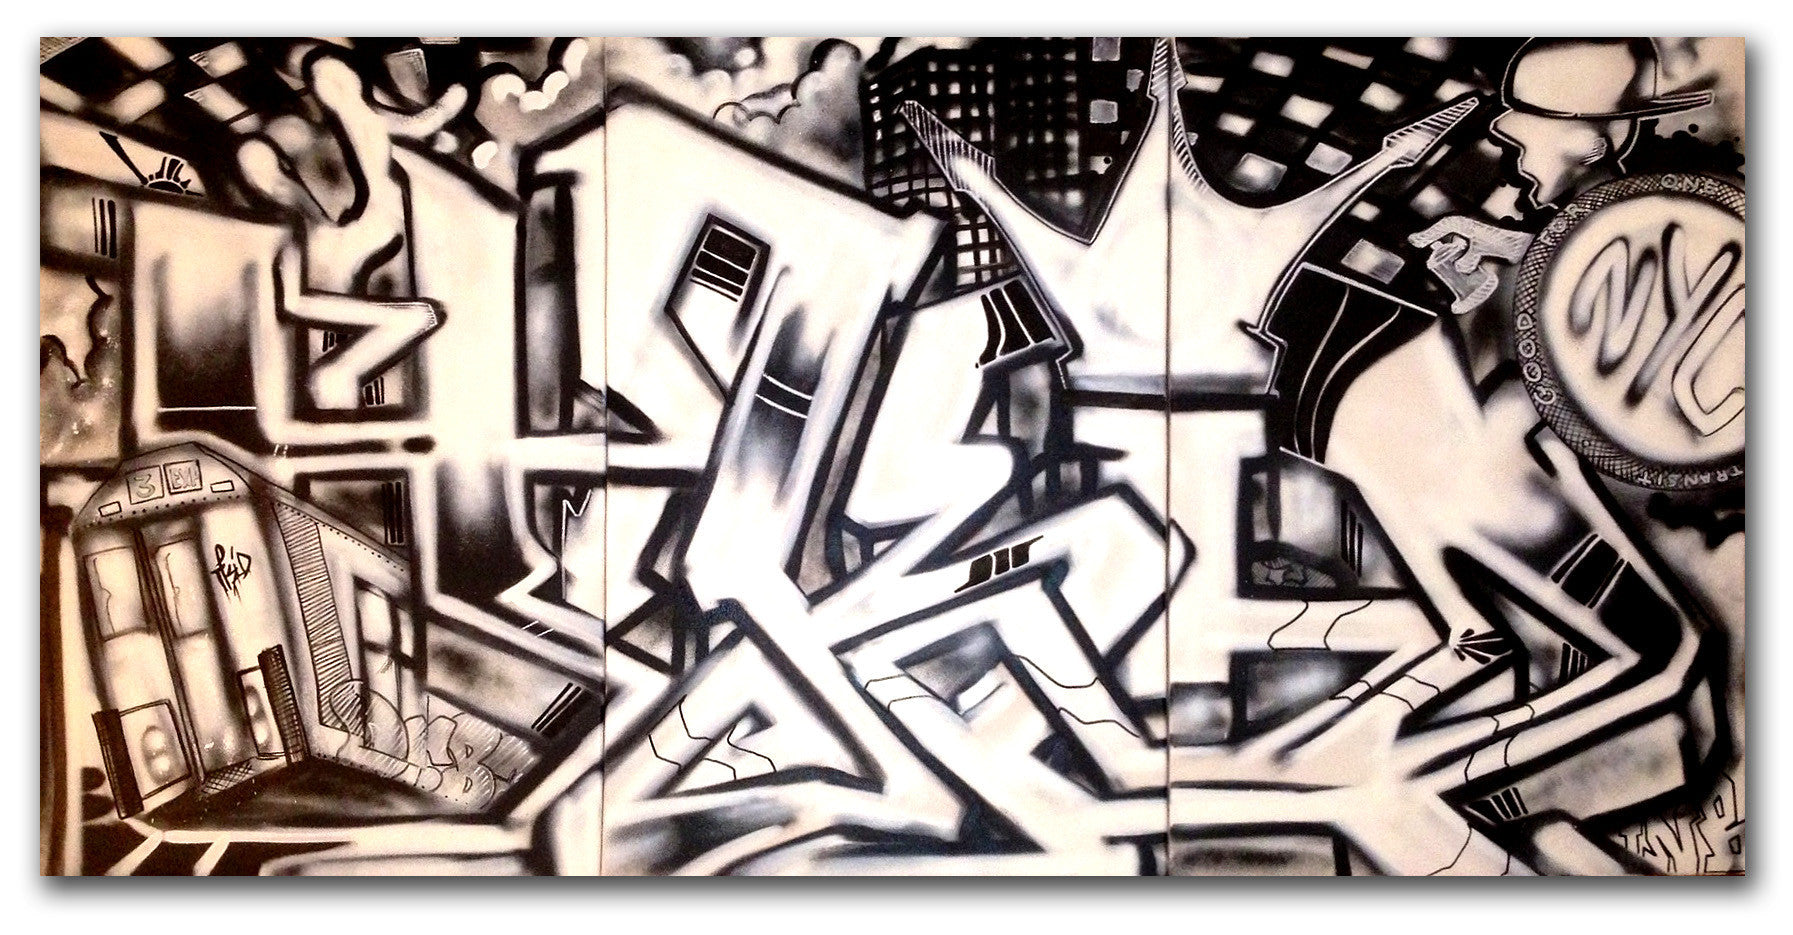 T-KID 170  - "Triptych" Painting